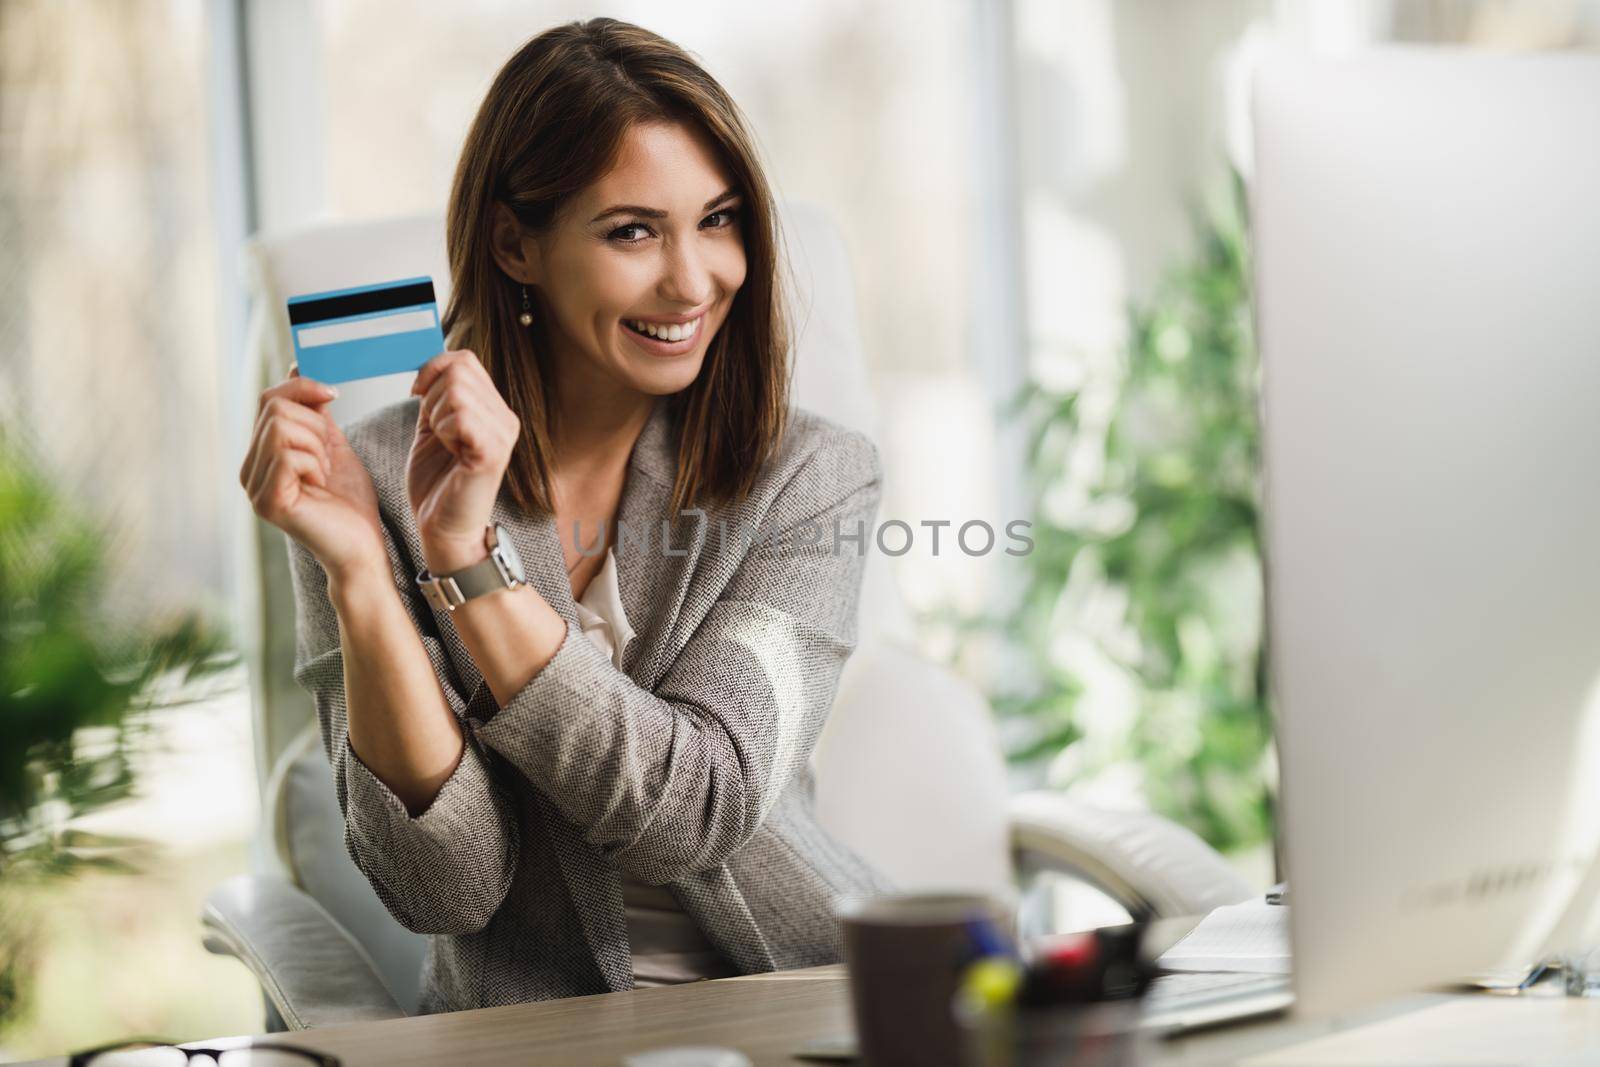 An attractive business woman holding a credit card and looking at camera while working on her computer in the office.